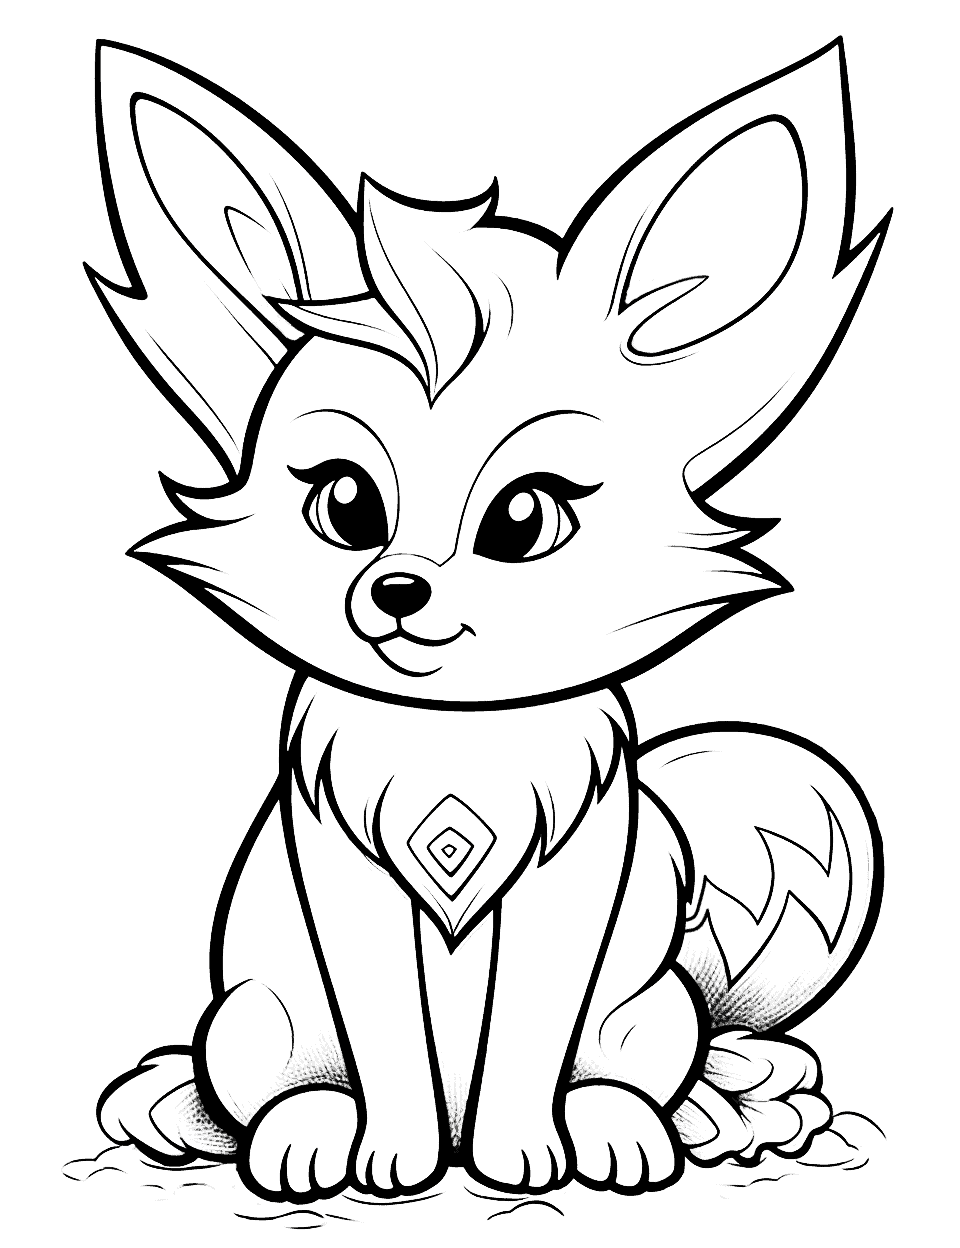 Animal Jam Inspired Fox Coloring Page - A fox inspired by the popular game Animal Jam in a playful pose.